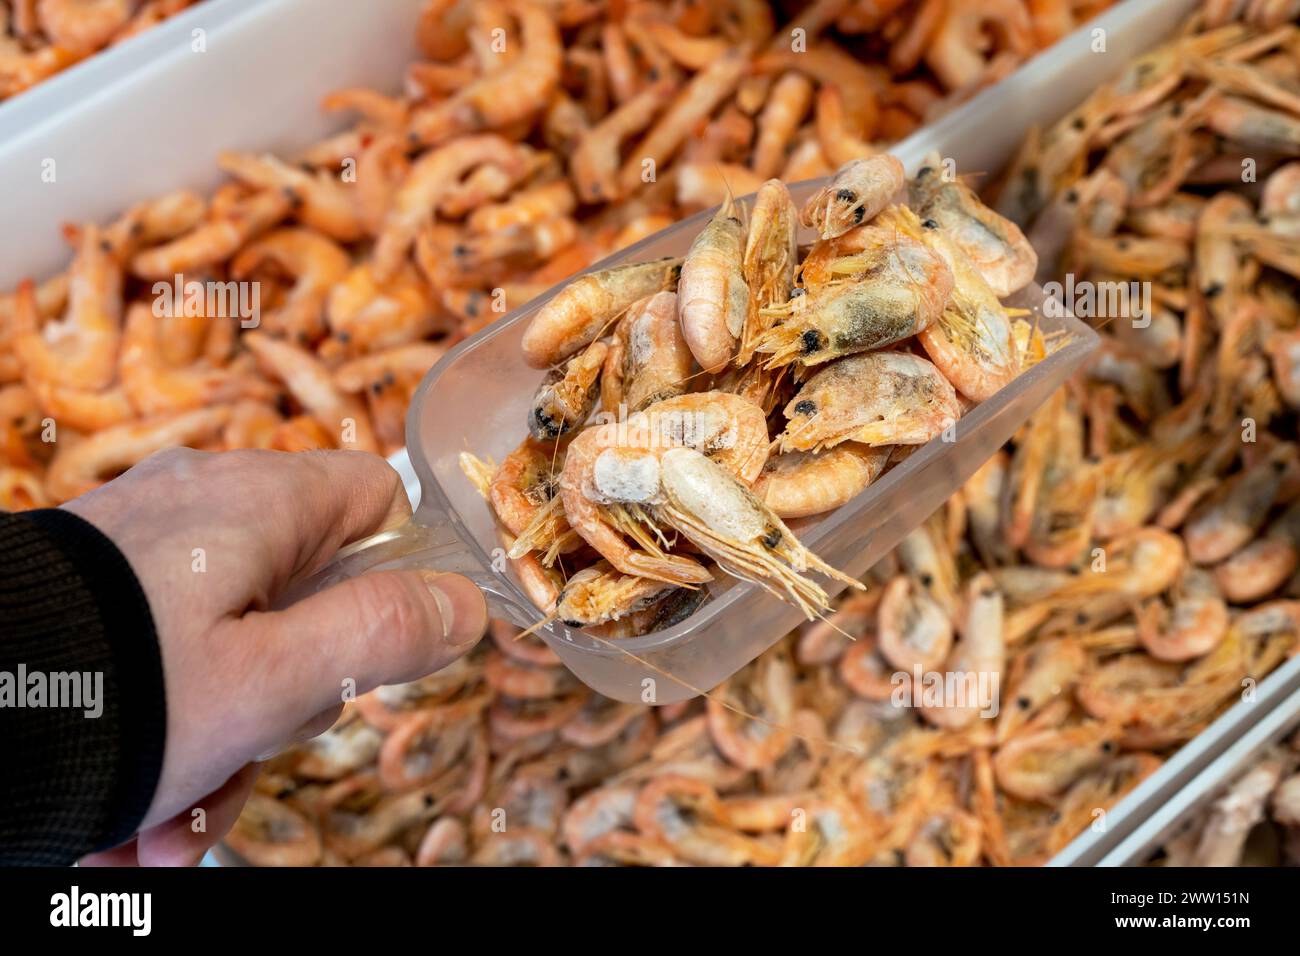 Frozen shrimp in a supermarket or grocery store, close-up. Seafood. Man holds scoop with shrimp in supermarket. Stock Photo